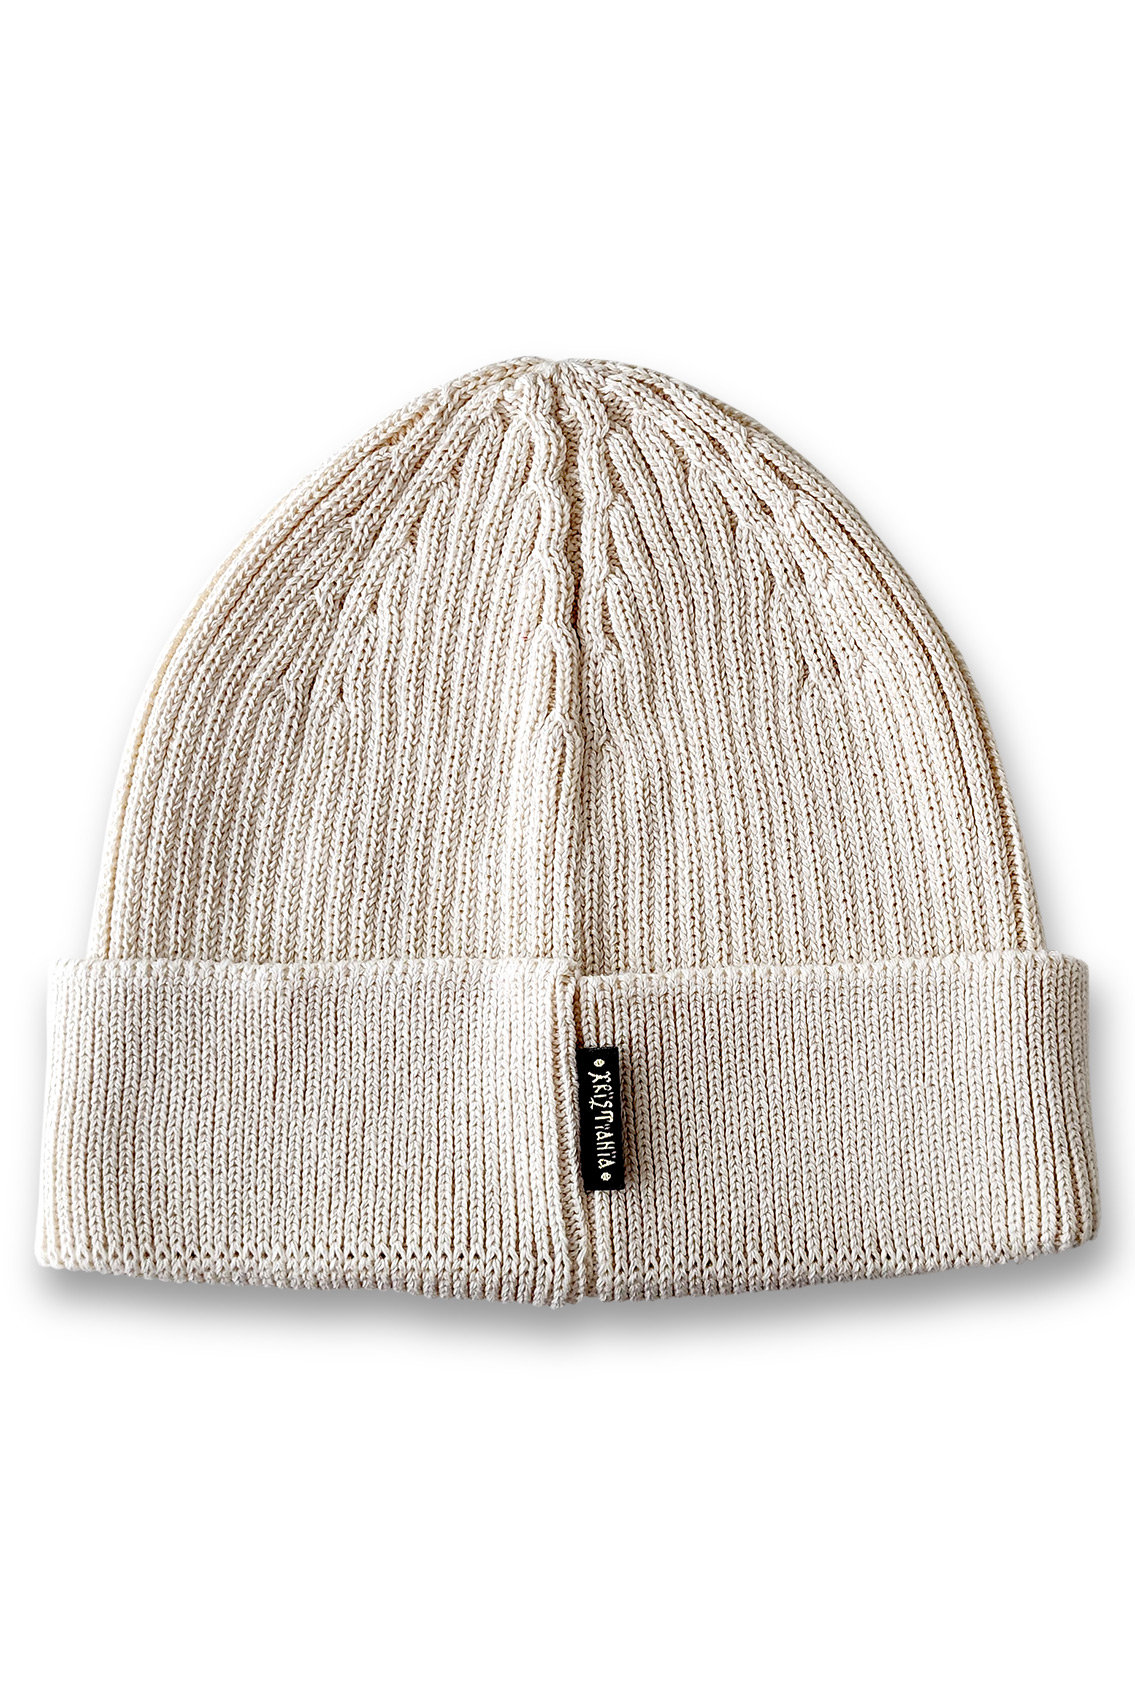 white knitted cotton hat